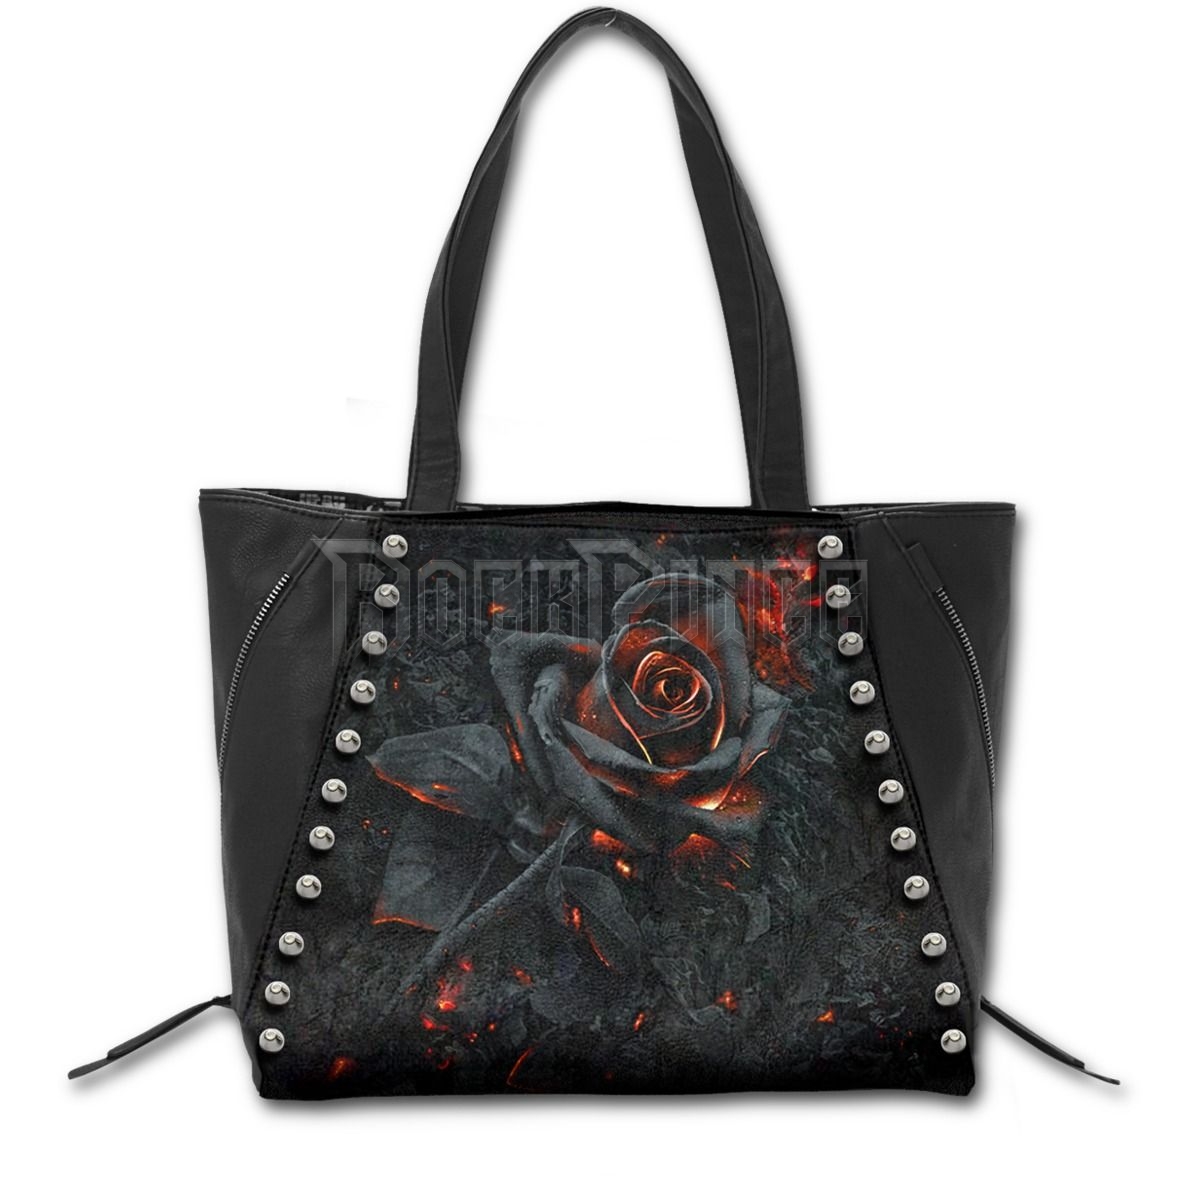 BURNT ROSE - Tote Bag - Top quality PU Leather Studded - K048A306